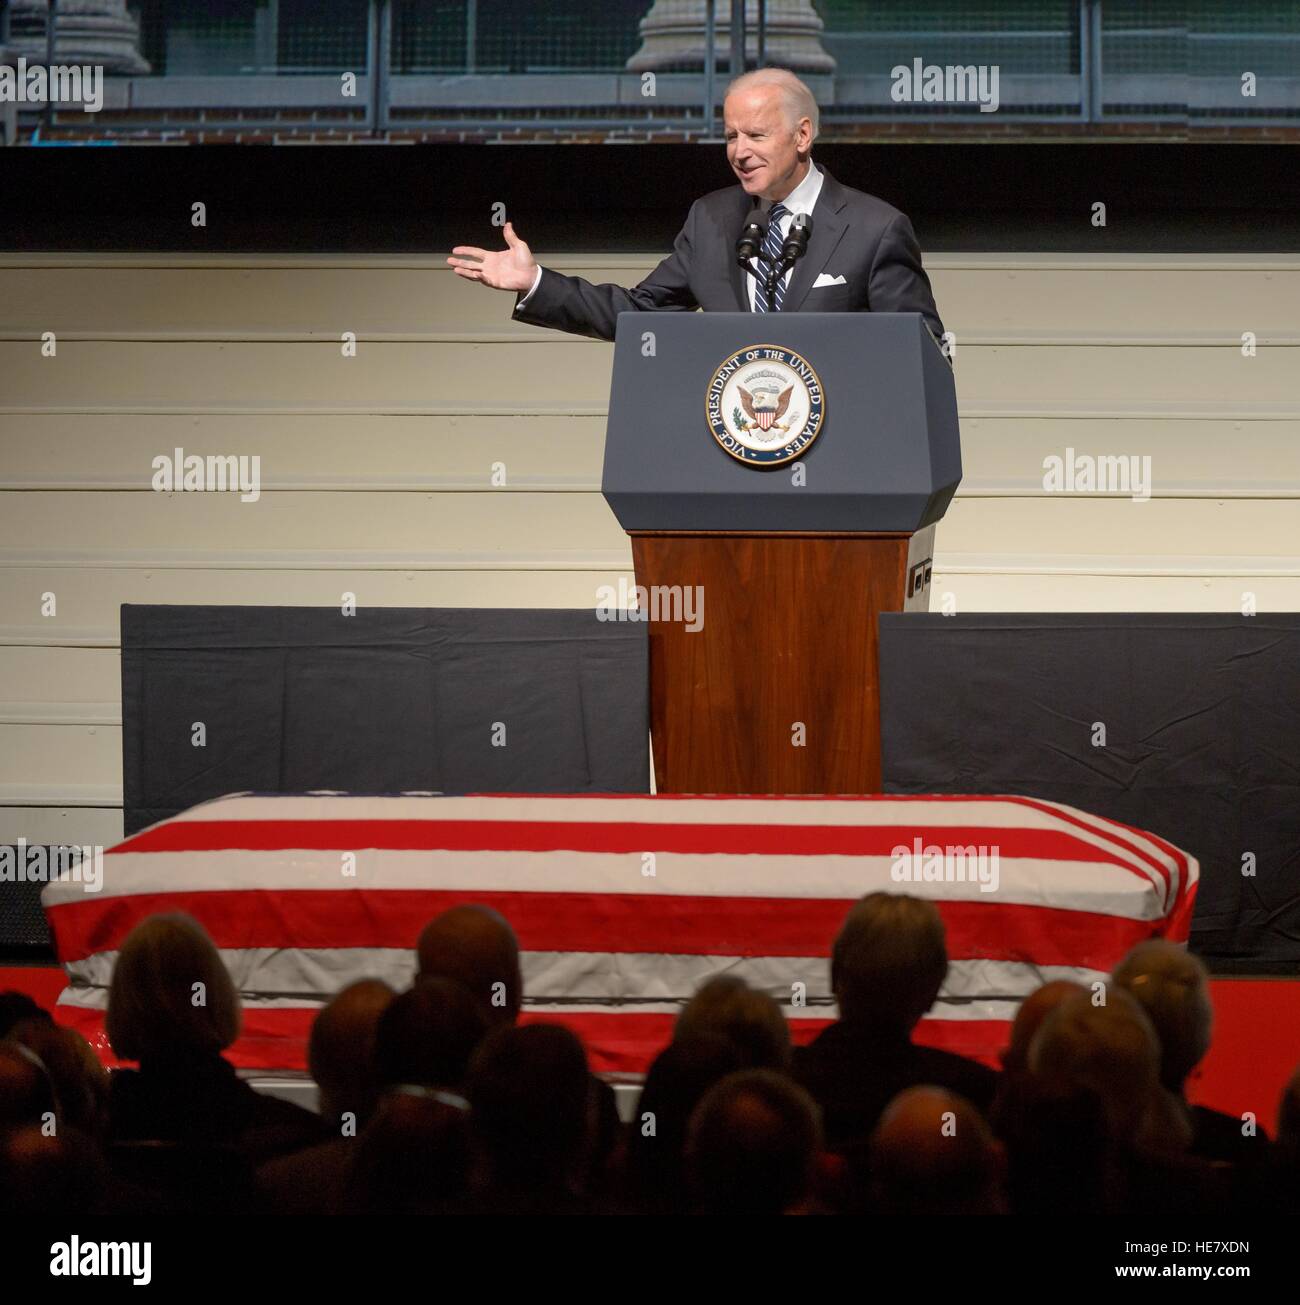 U.S. Vice President Joe Biden speaks during a service celebrating the life of former astronaut and U.S. Senator John Glenn during memorial service at Ohio State University December 17, 2016 in Columbus, Ohio. The former Marine pilot, Senator and first man to orbit the earth died last week at the age of 95. Stock Photo